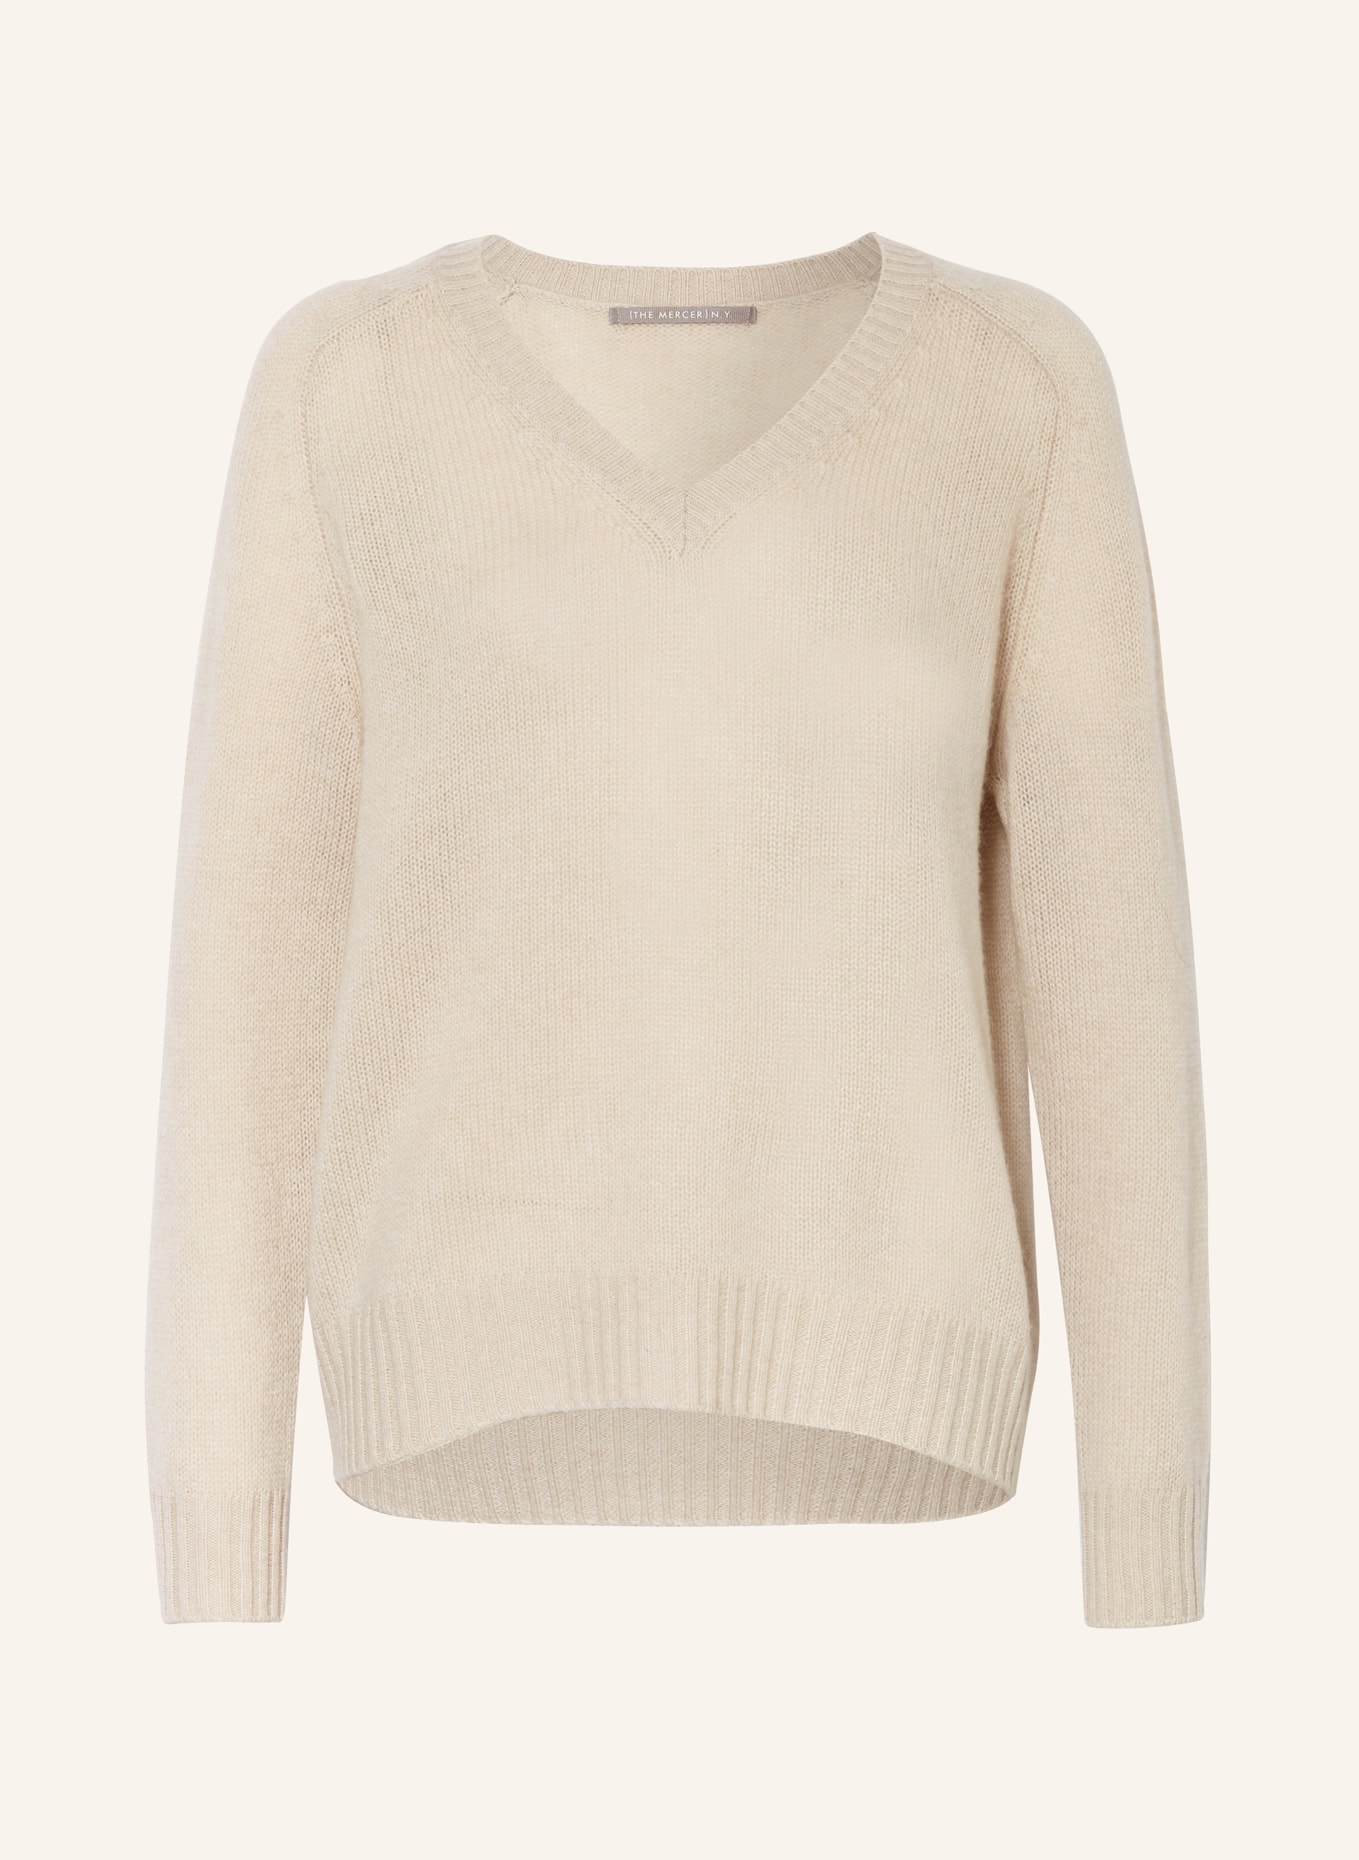 (THE MERCER) N.Y. Cashmere sweater, Color: BEIGE (Image 1)